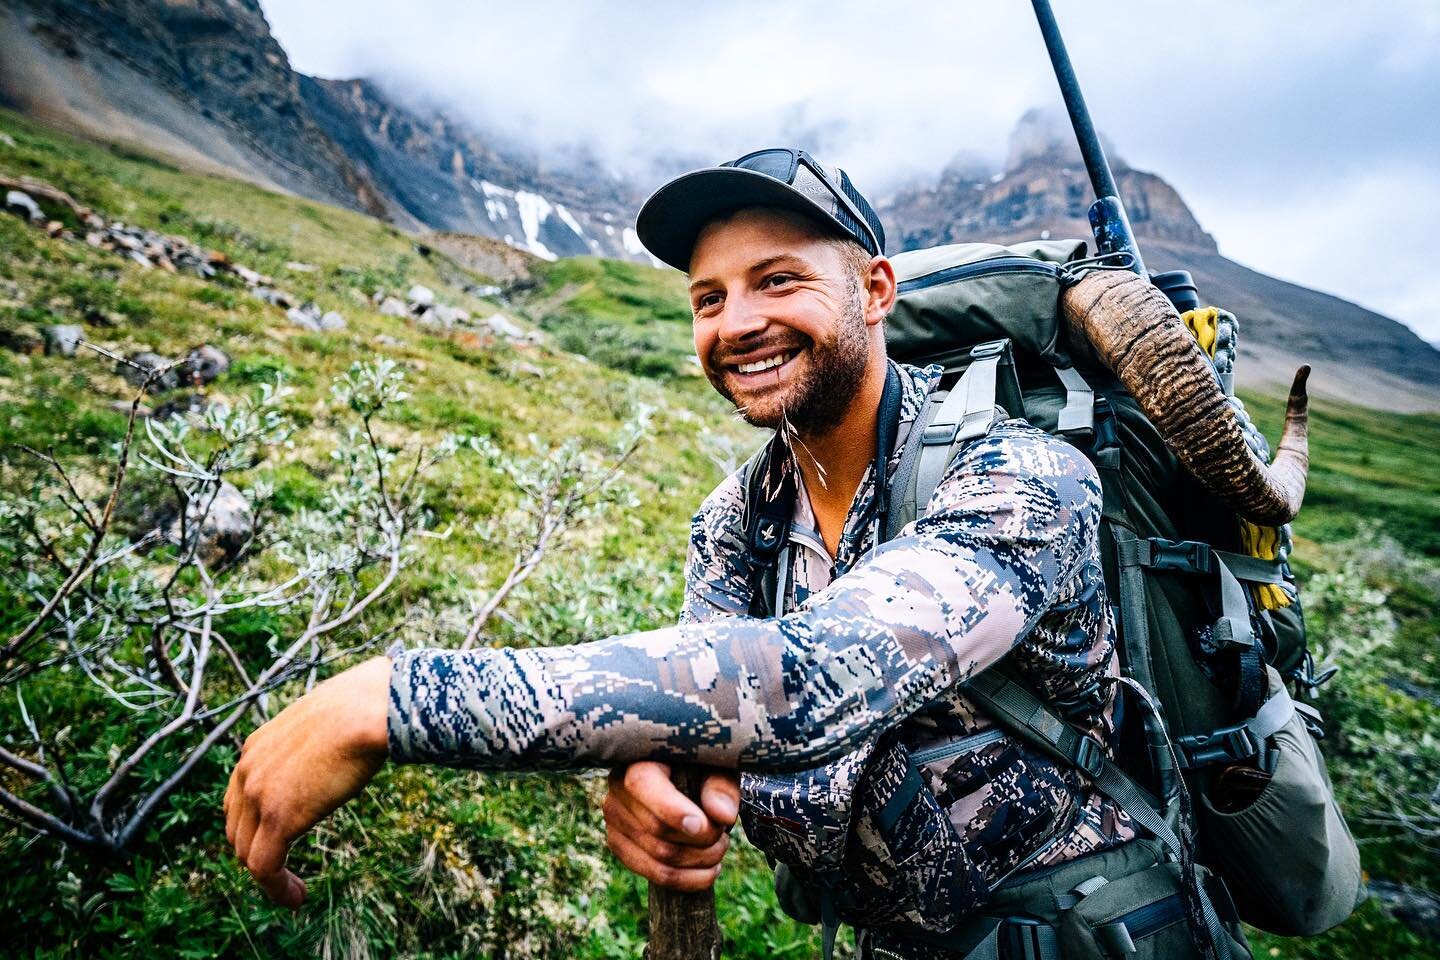 If you caught the @wildsheepsocietybc&rsquo;s Salute to Conservation over the weekend, you heard @bowhuntercam tell of a particularly special hunt.

The tale included his brother-in-law, Landen Collins (pictured) who hunts hard, laughs often, doubles